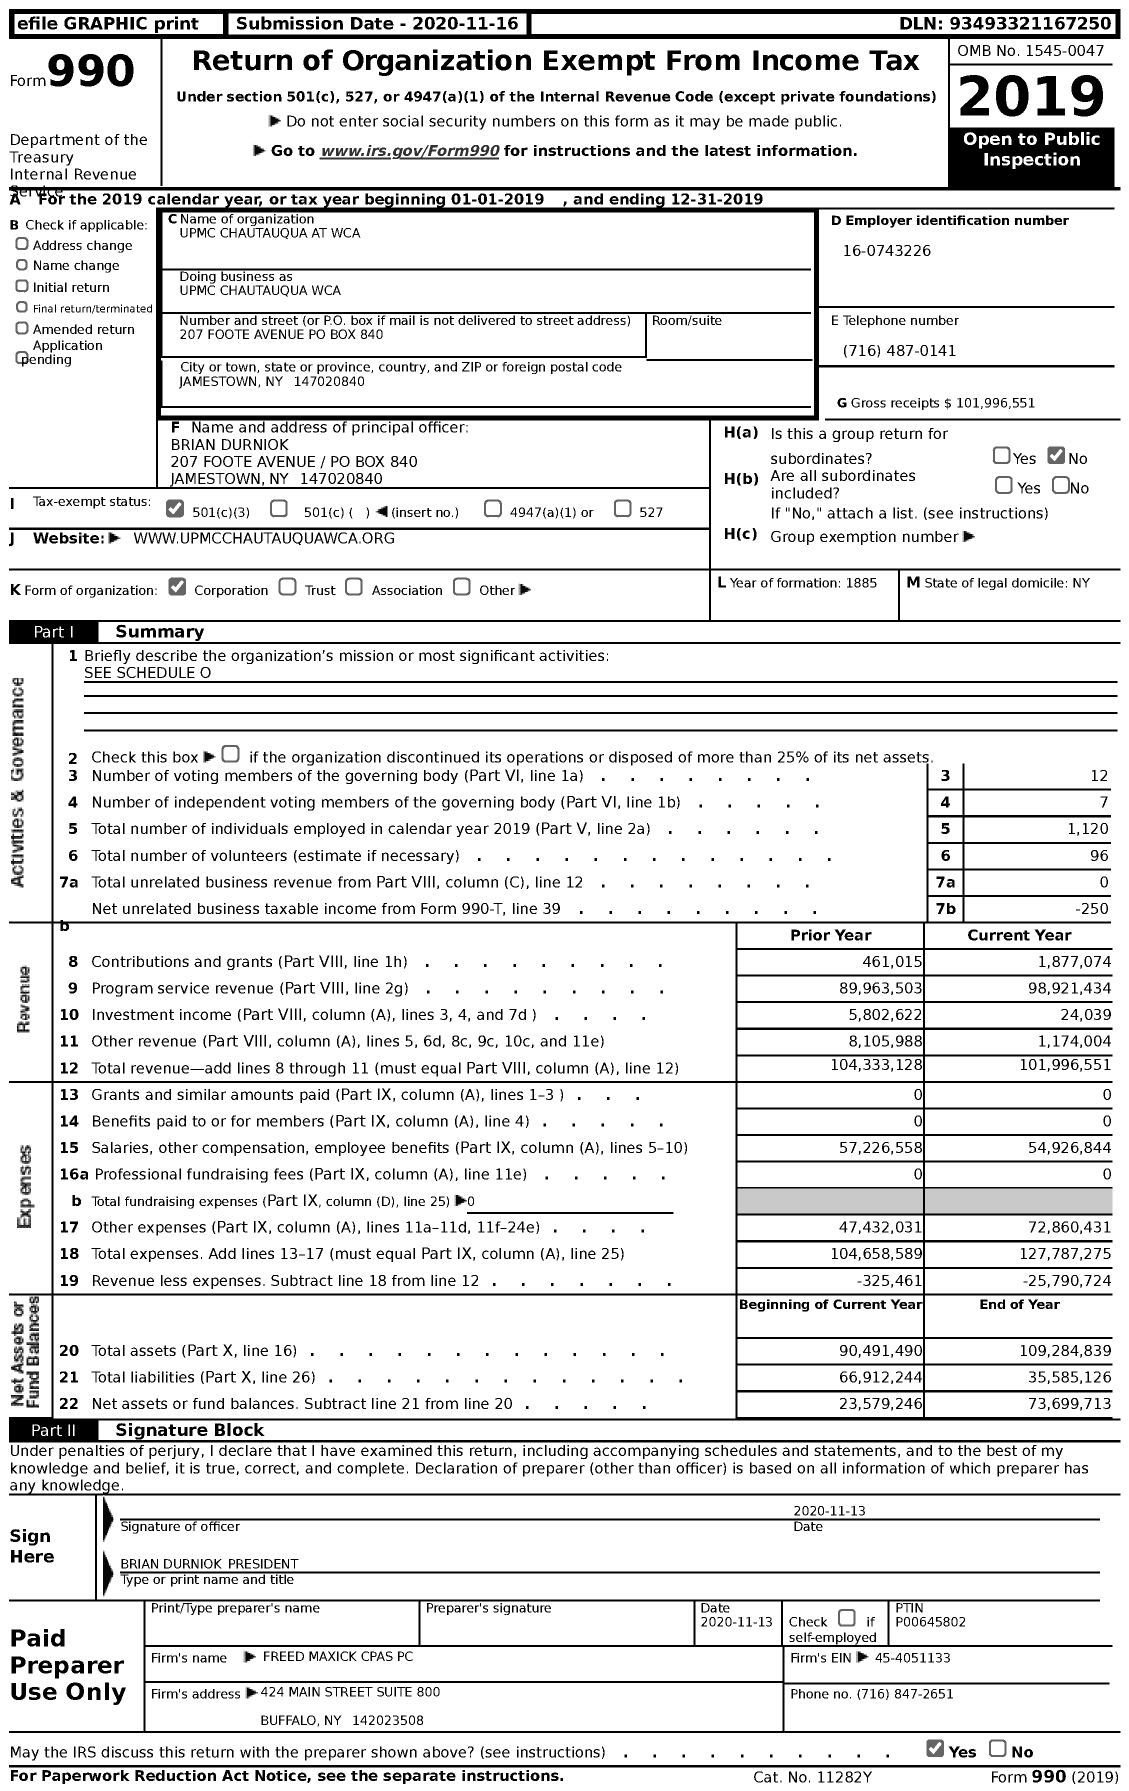 Image of first page of 2019 Form 990 for Upmc Chautauqua Wca (WCA)